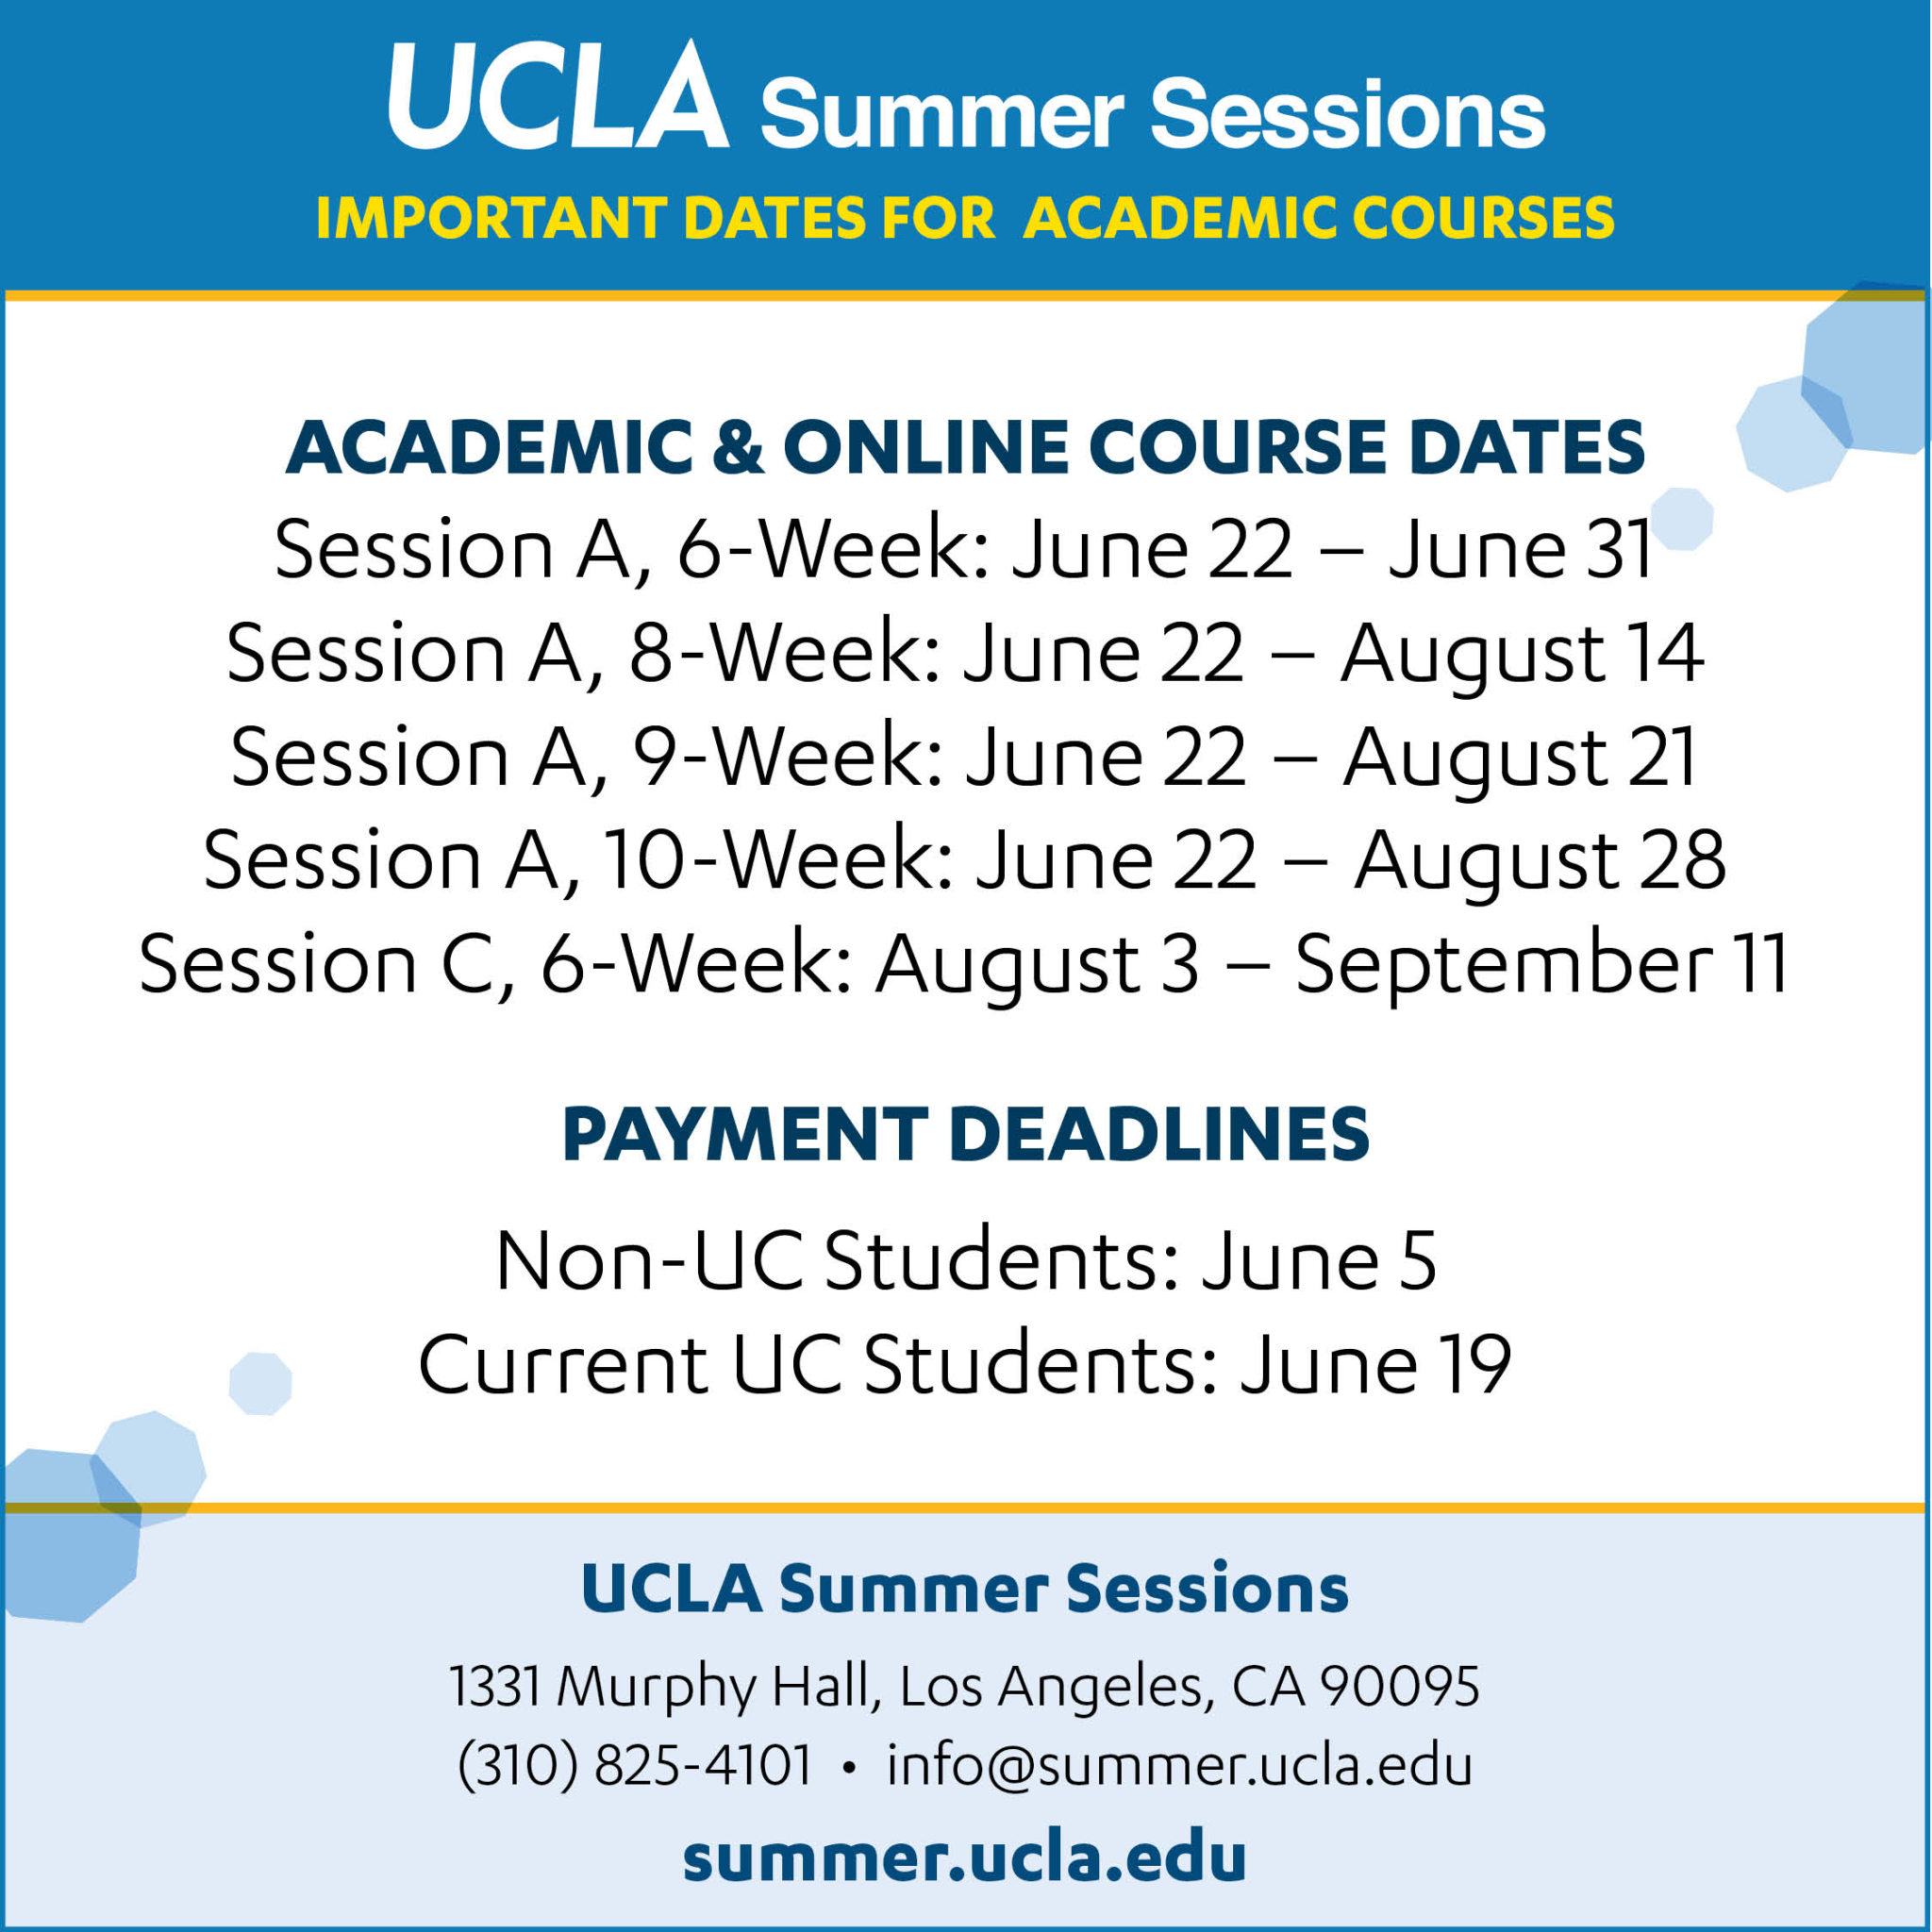 Any Plans for the Summer? Enroll TODAY in an Online UCLA Summer Course